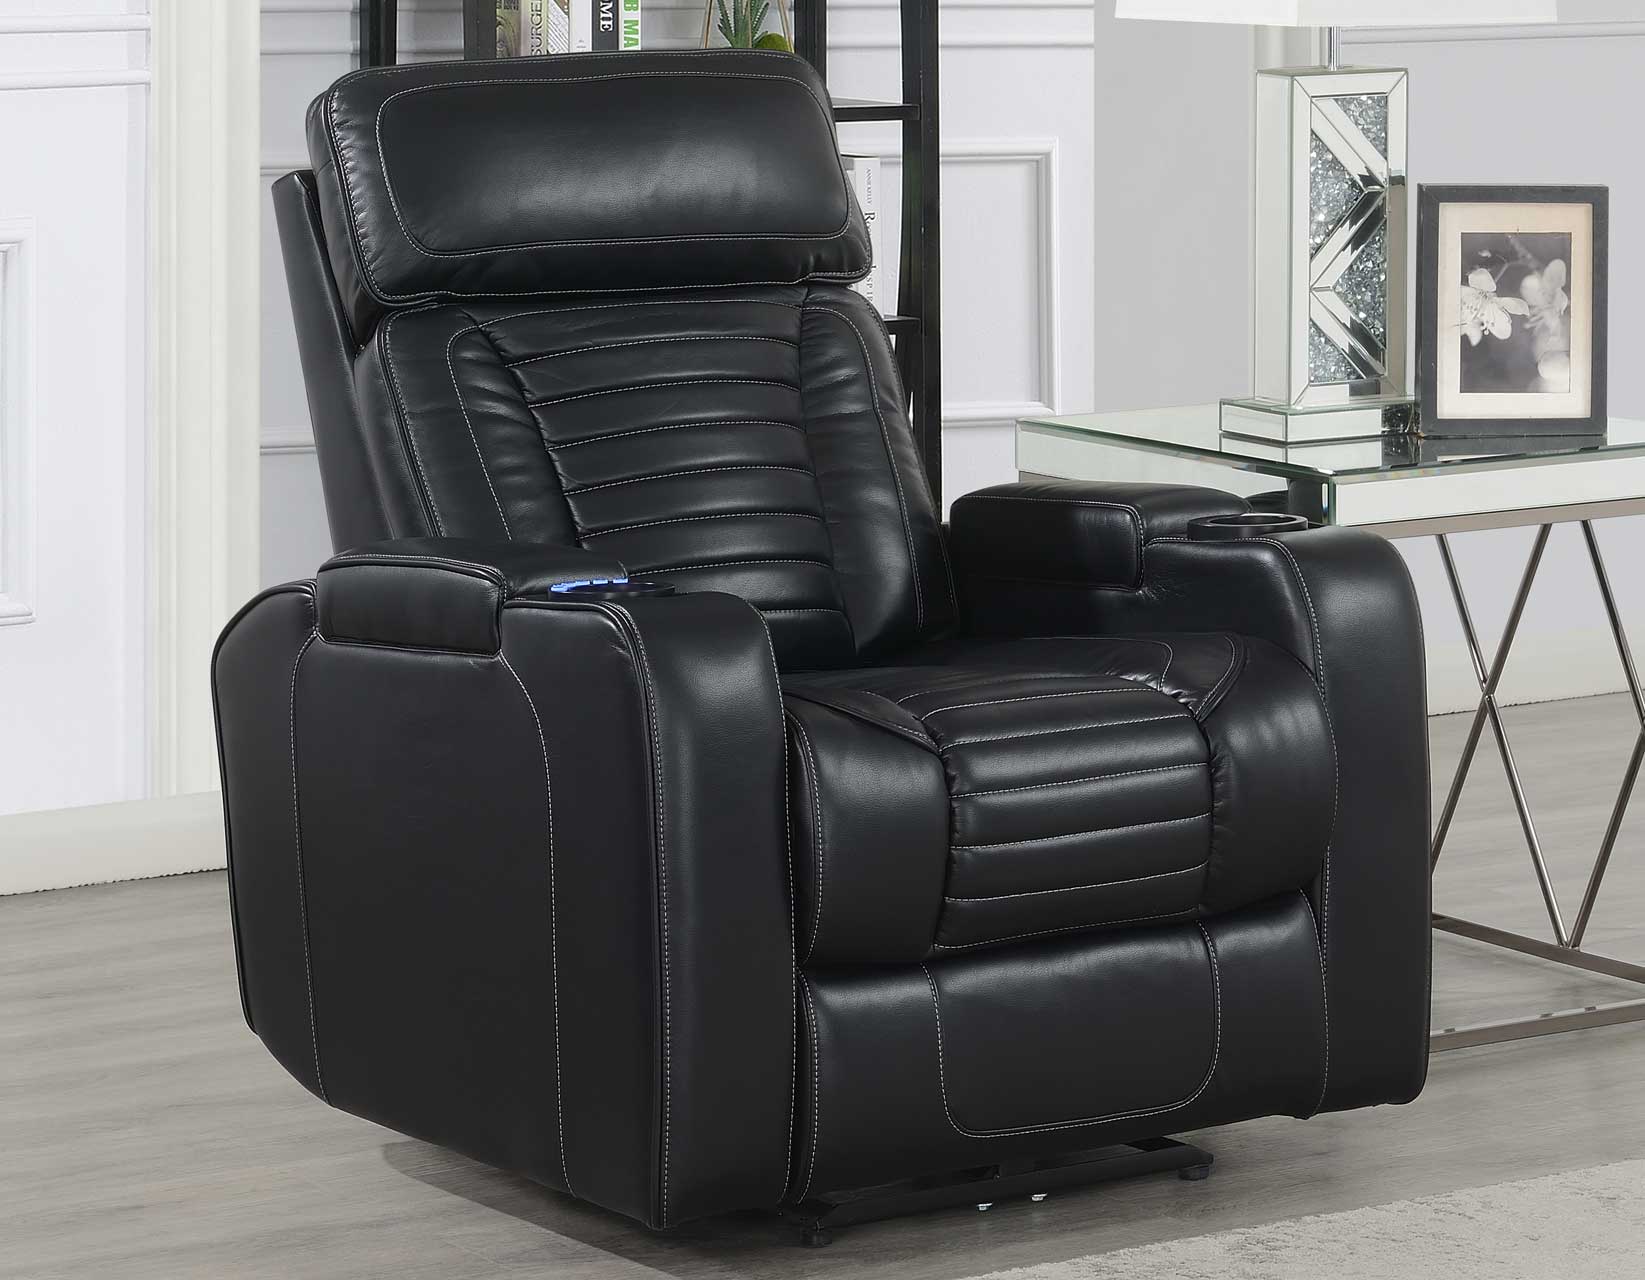 Lavon 3-Piece Dual-Power Leatherette Reclining Set-Recliner, Sofa and Love